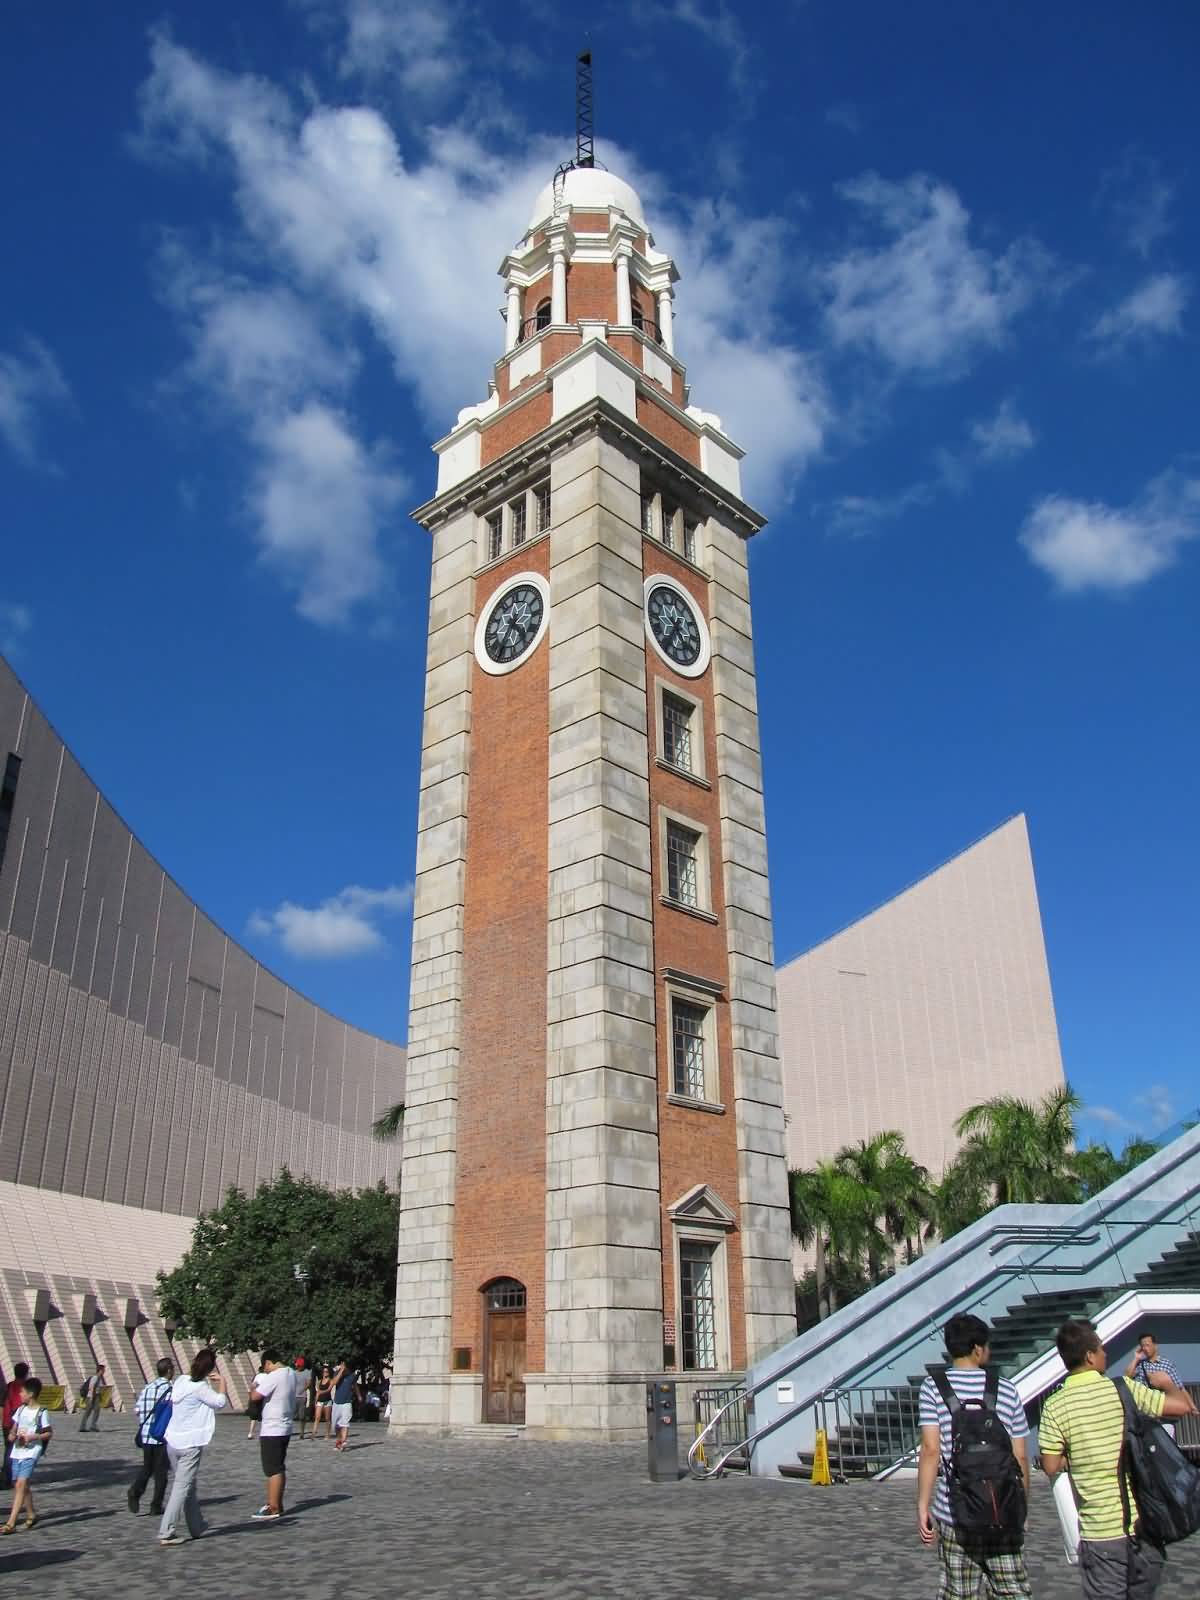 30+ Most Adorable Clock Tower Pictures And Photos In Hong Kong